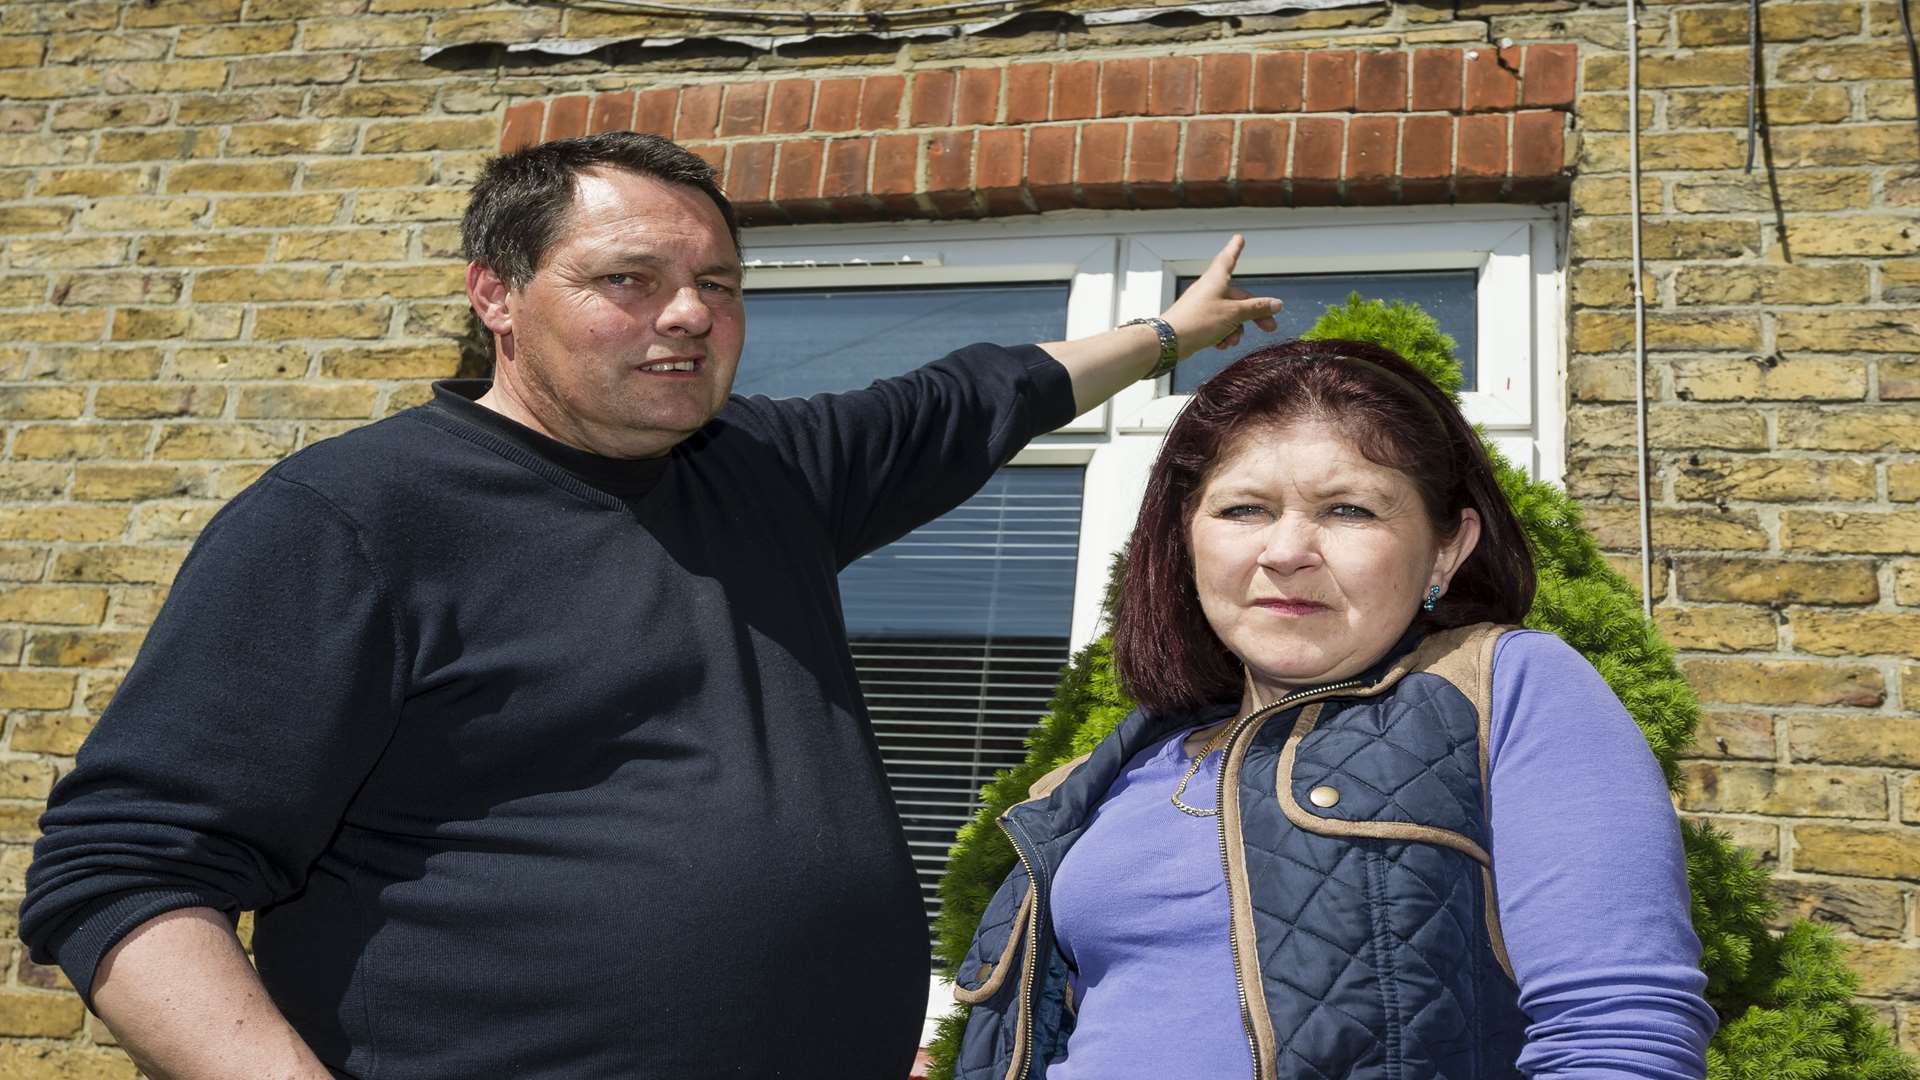 Adrian and Sharon who say their house is falling down.